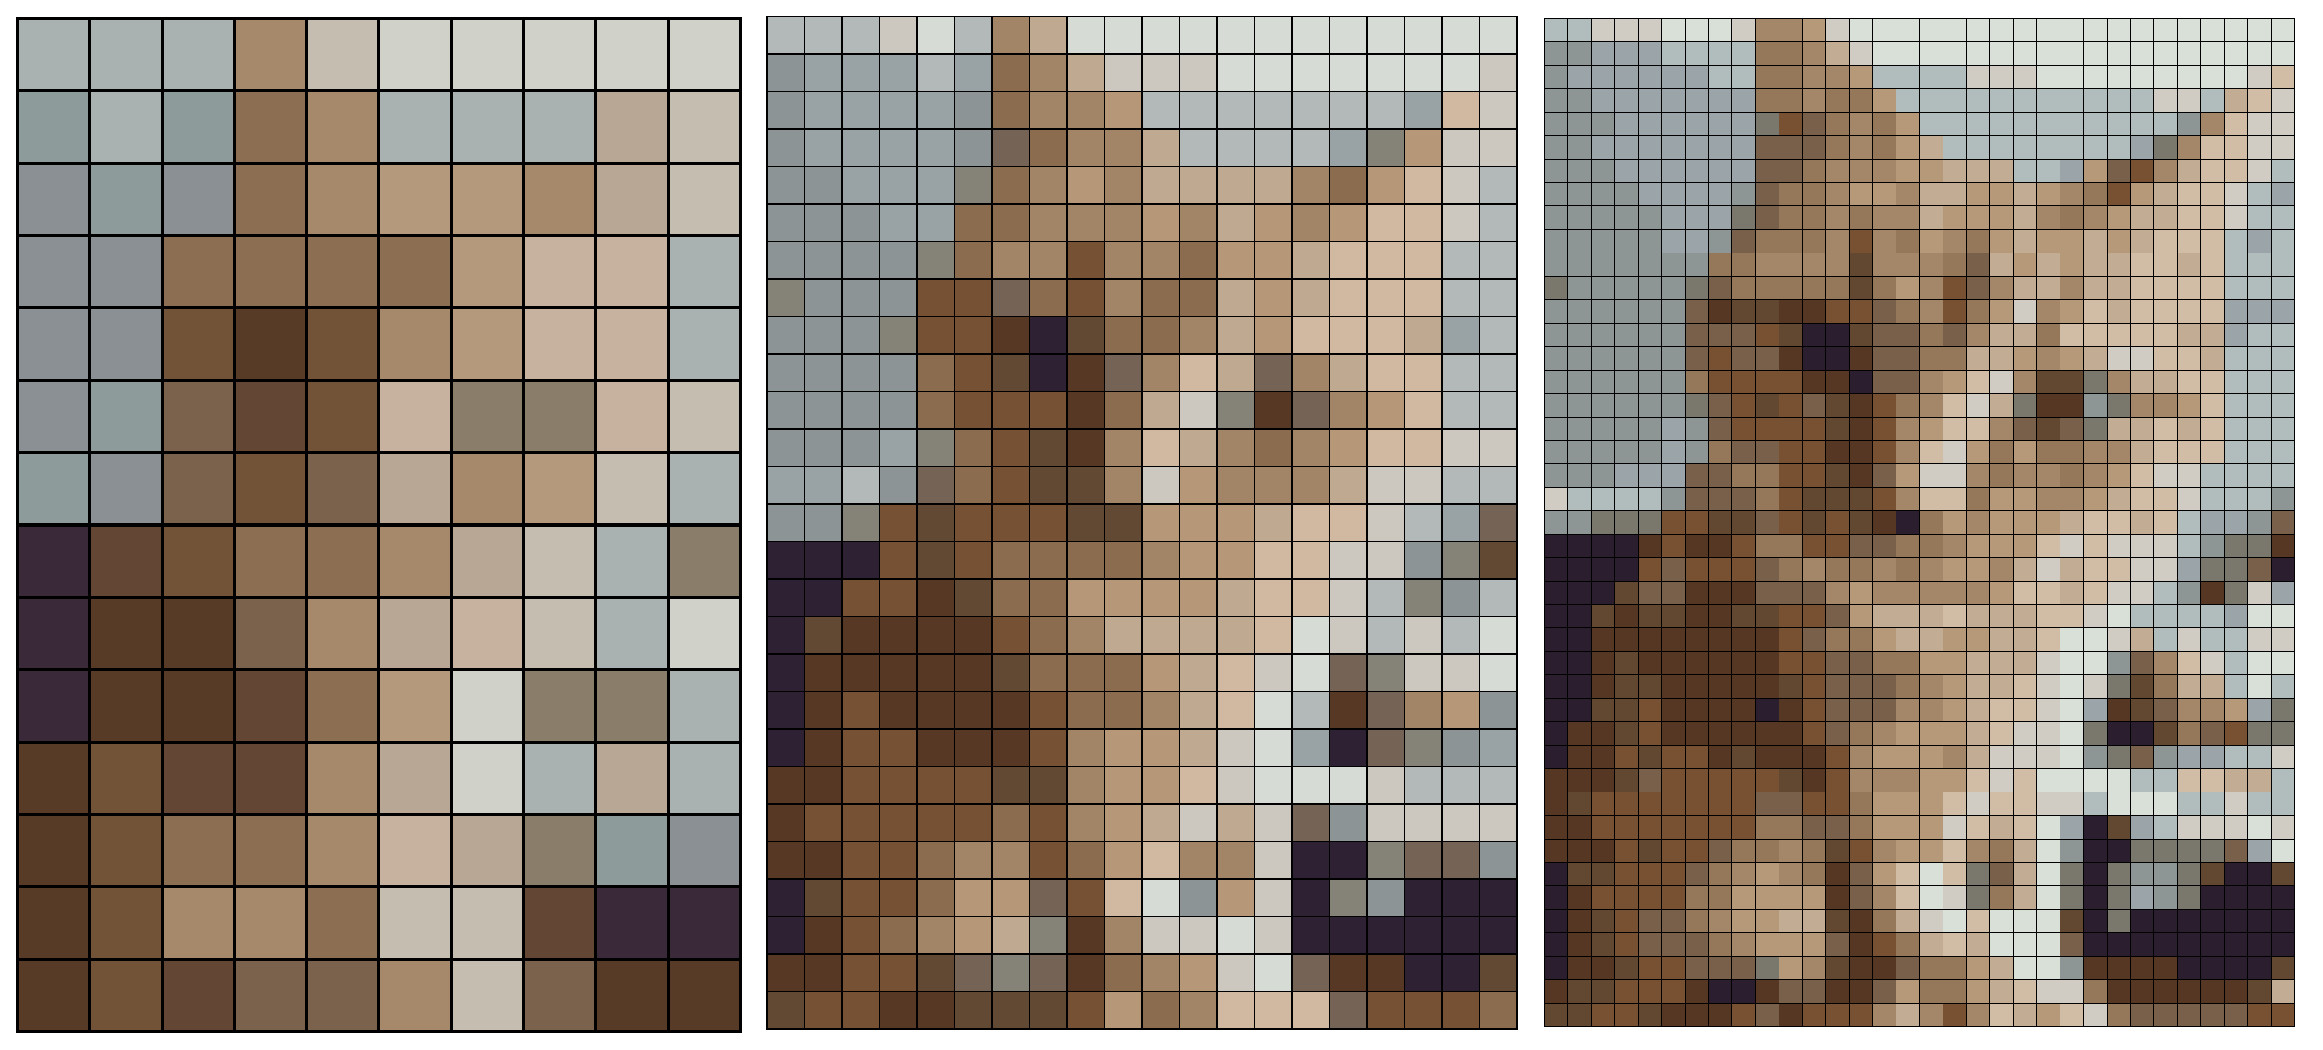 My neighbours&rsquo; cat, in varying degrees of pixellation.